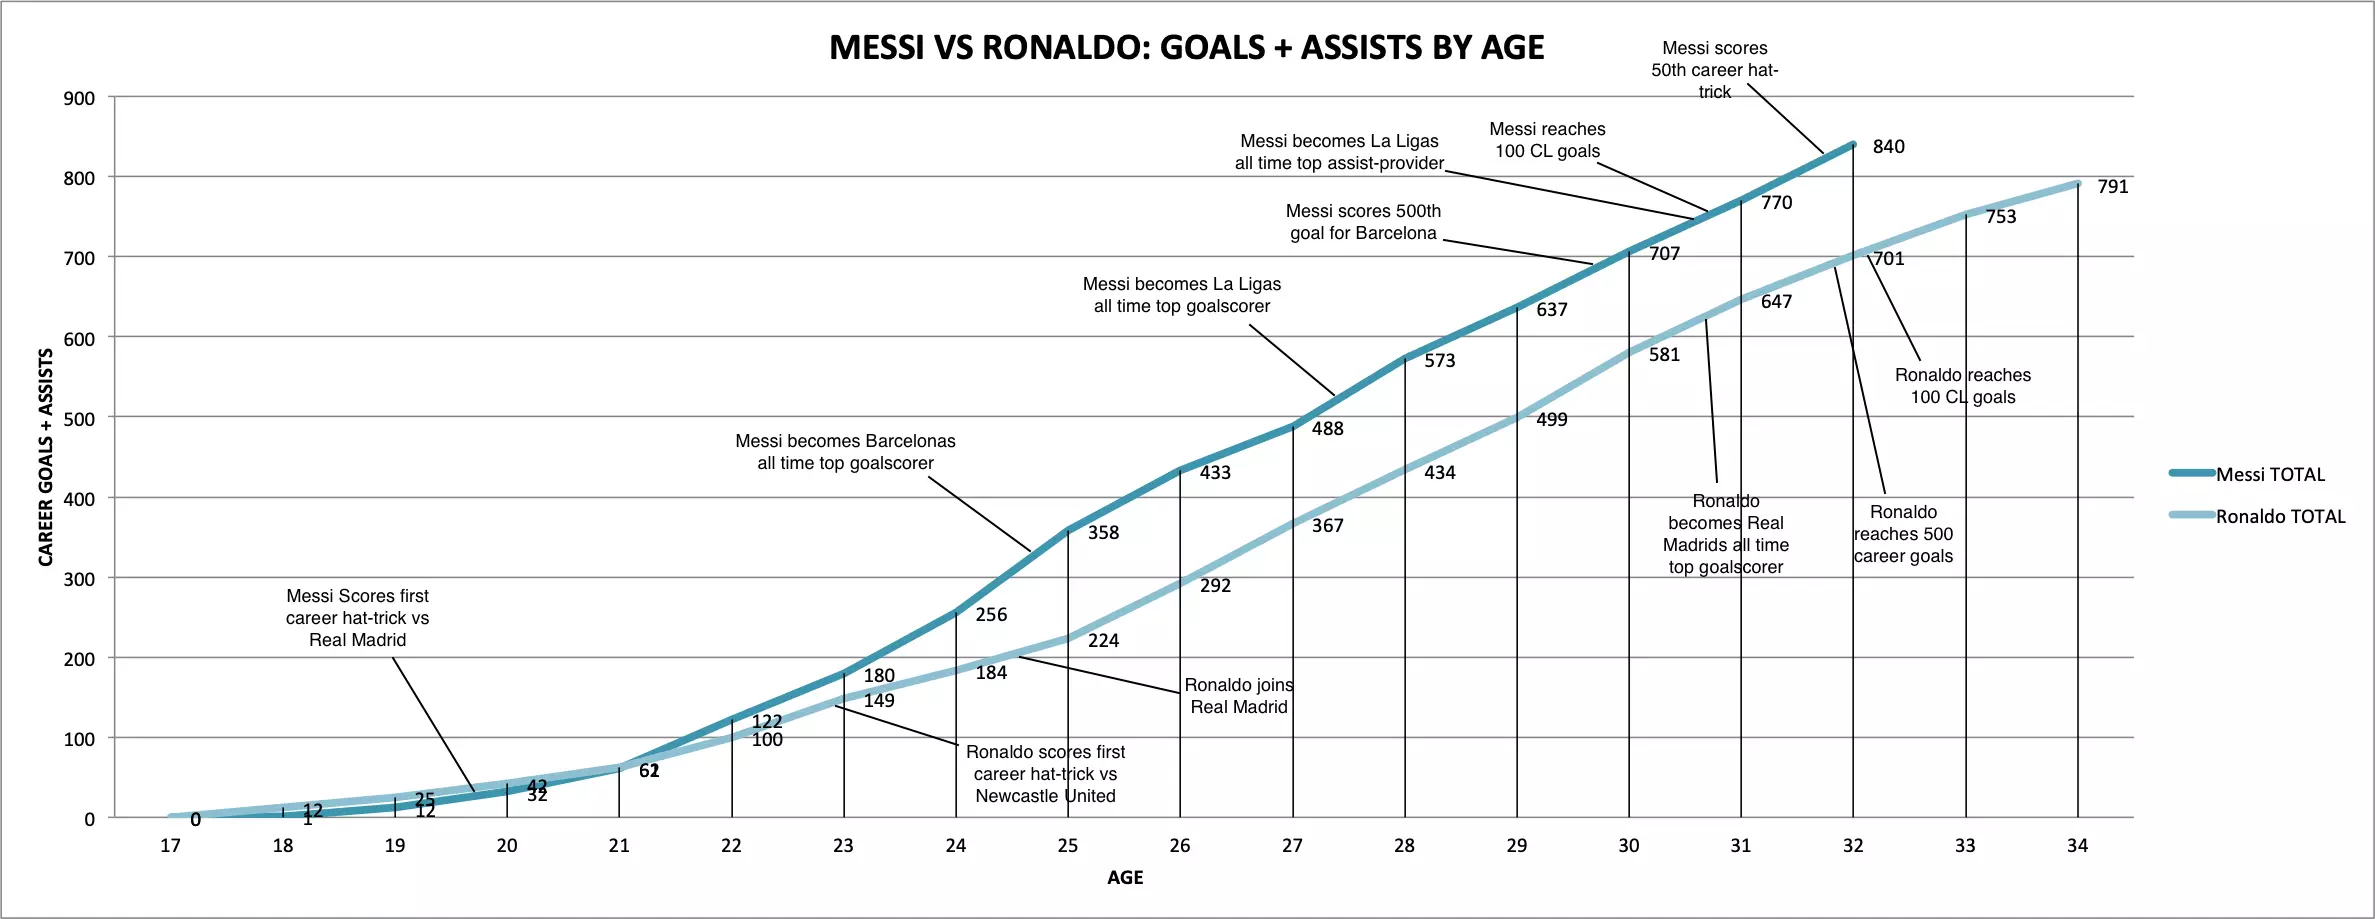 Messi and Ronaldo's goals and assist record by age. Image: PA Images